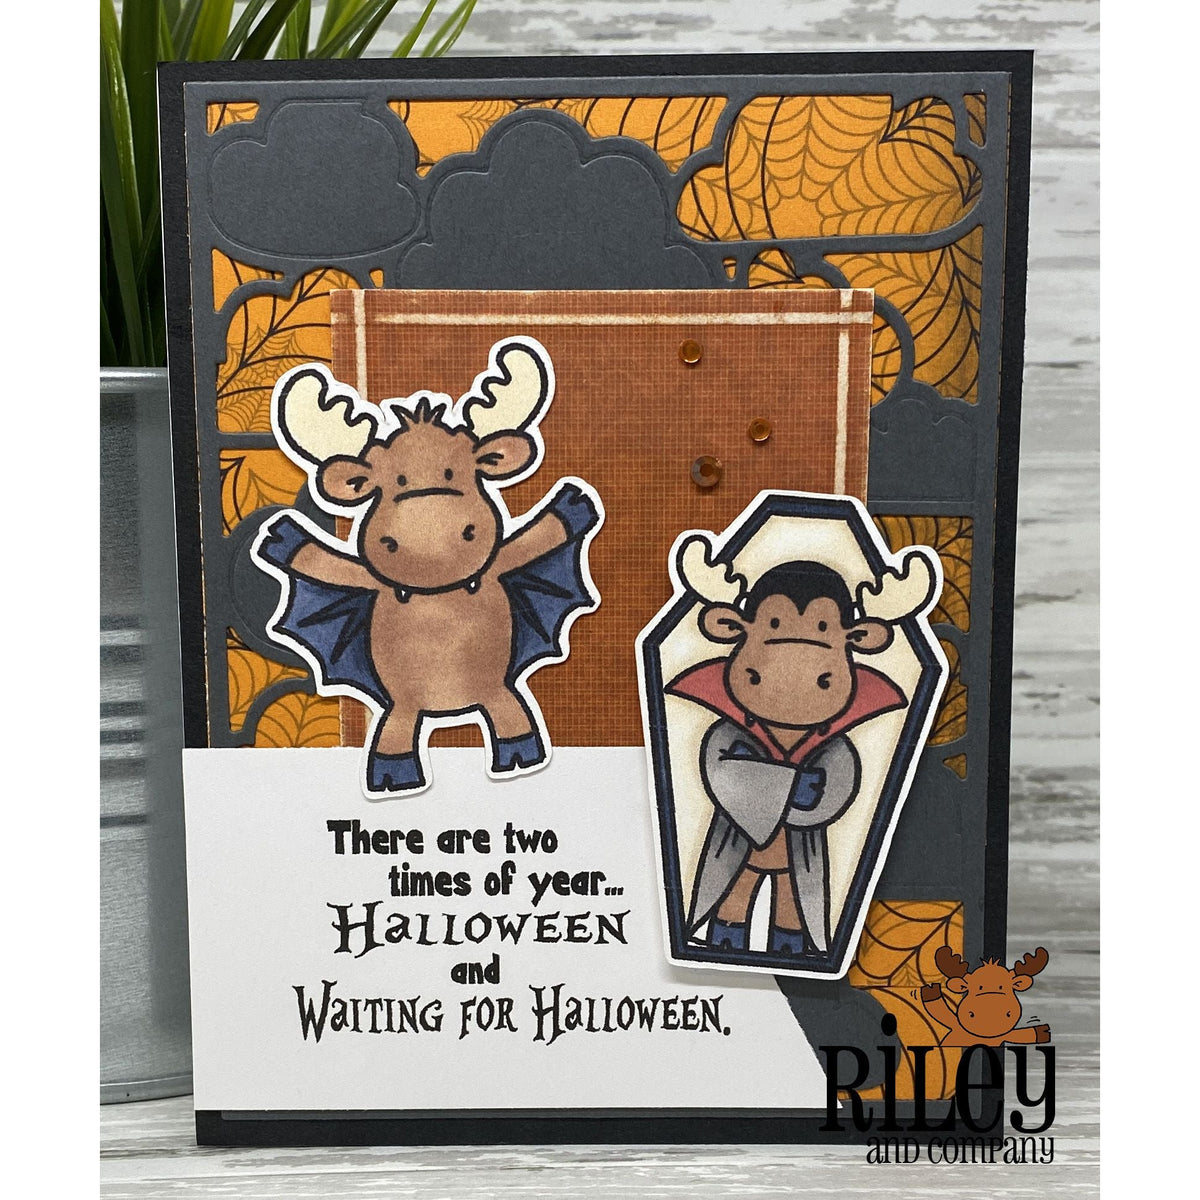 Waiting for Halloween Cling Stamp by Riley &amp; Co